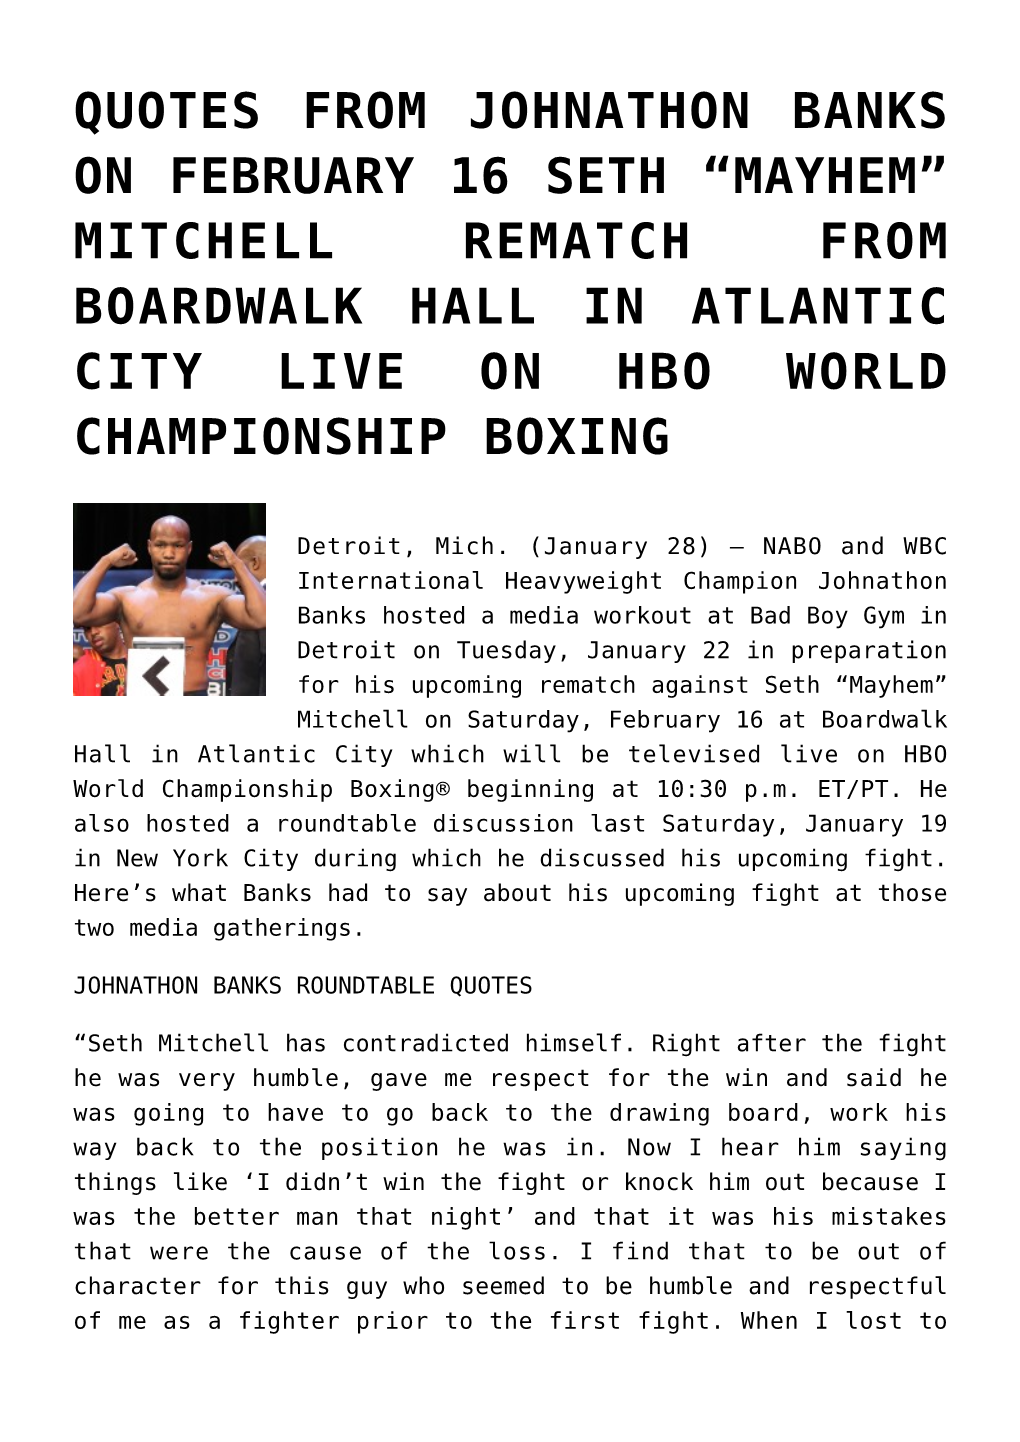 Quotes from Johnathon Banks on February 16 Seth “Mayhem” Mitchell Rematch from Boardwalk Hall in Atlantic City Live on Hbo World Championship Boxing